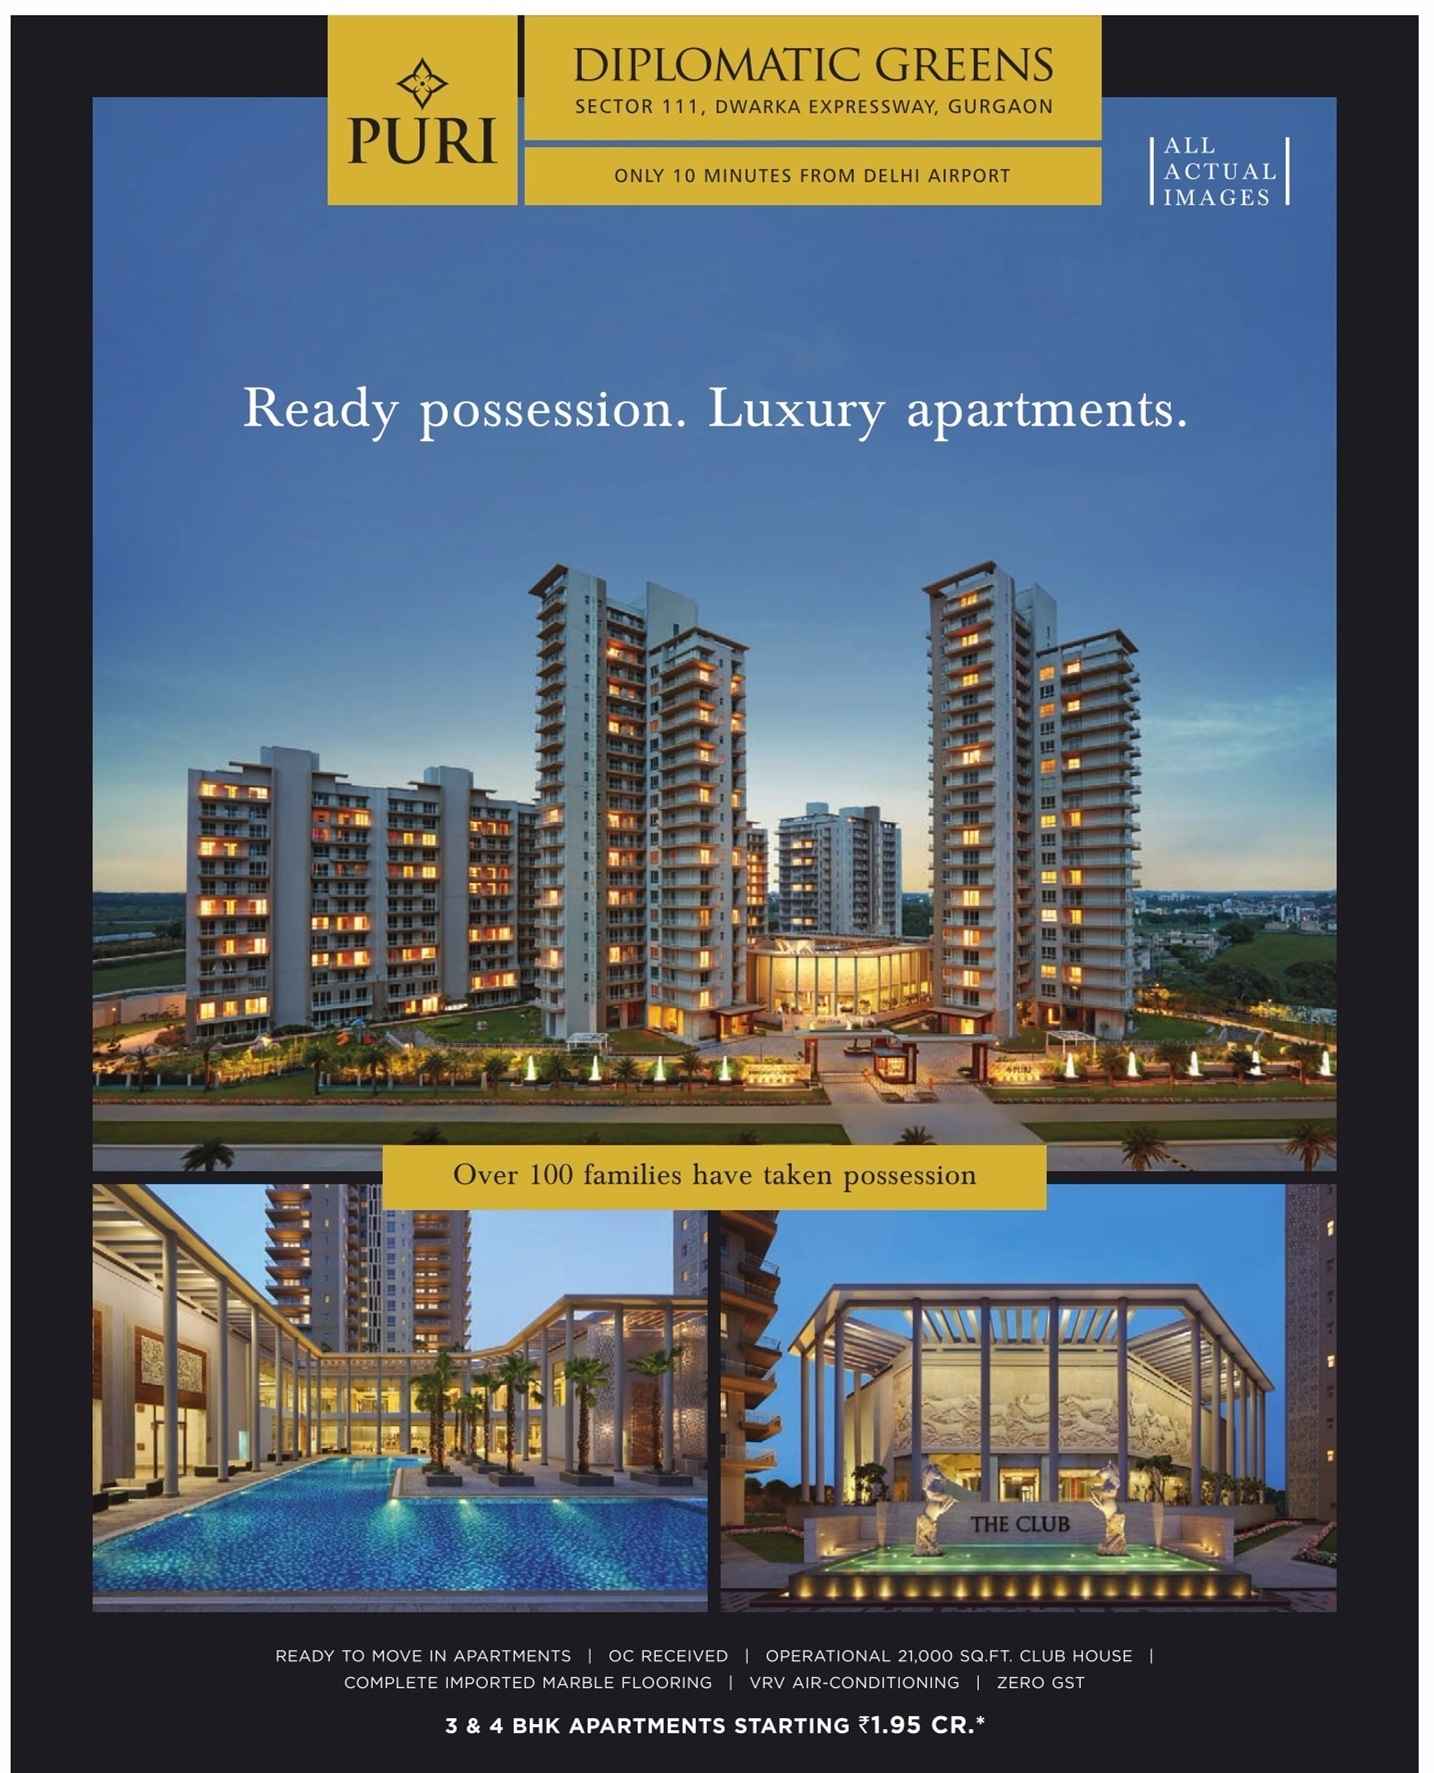 Ready possession luxury apartments at Puri Diplomatic Greens in Gurgaon